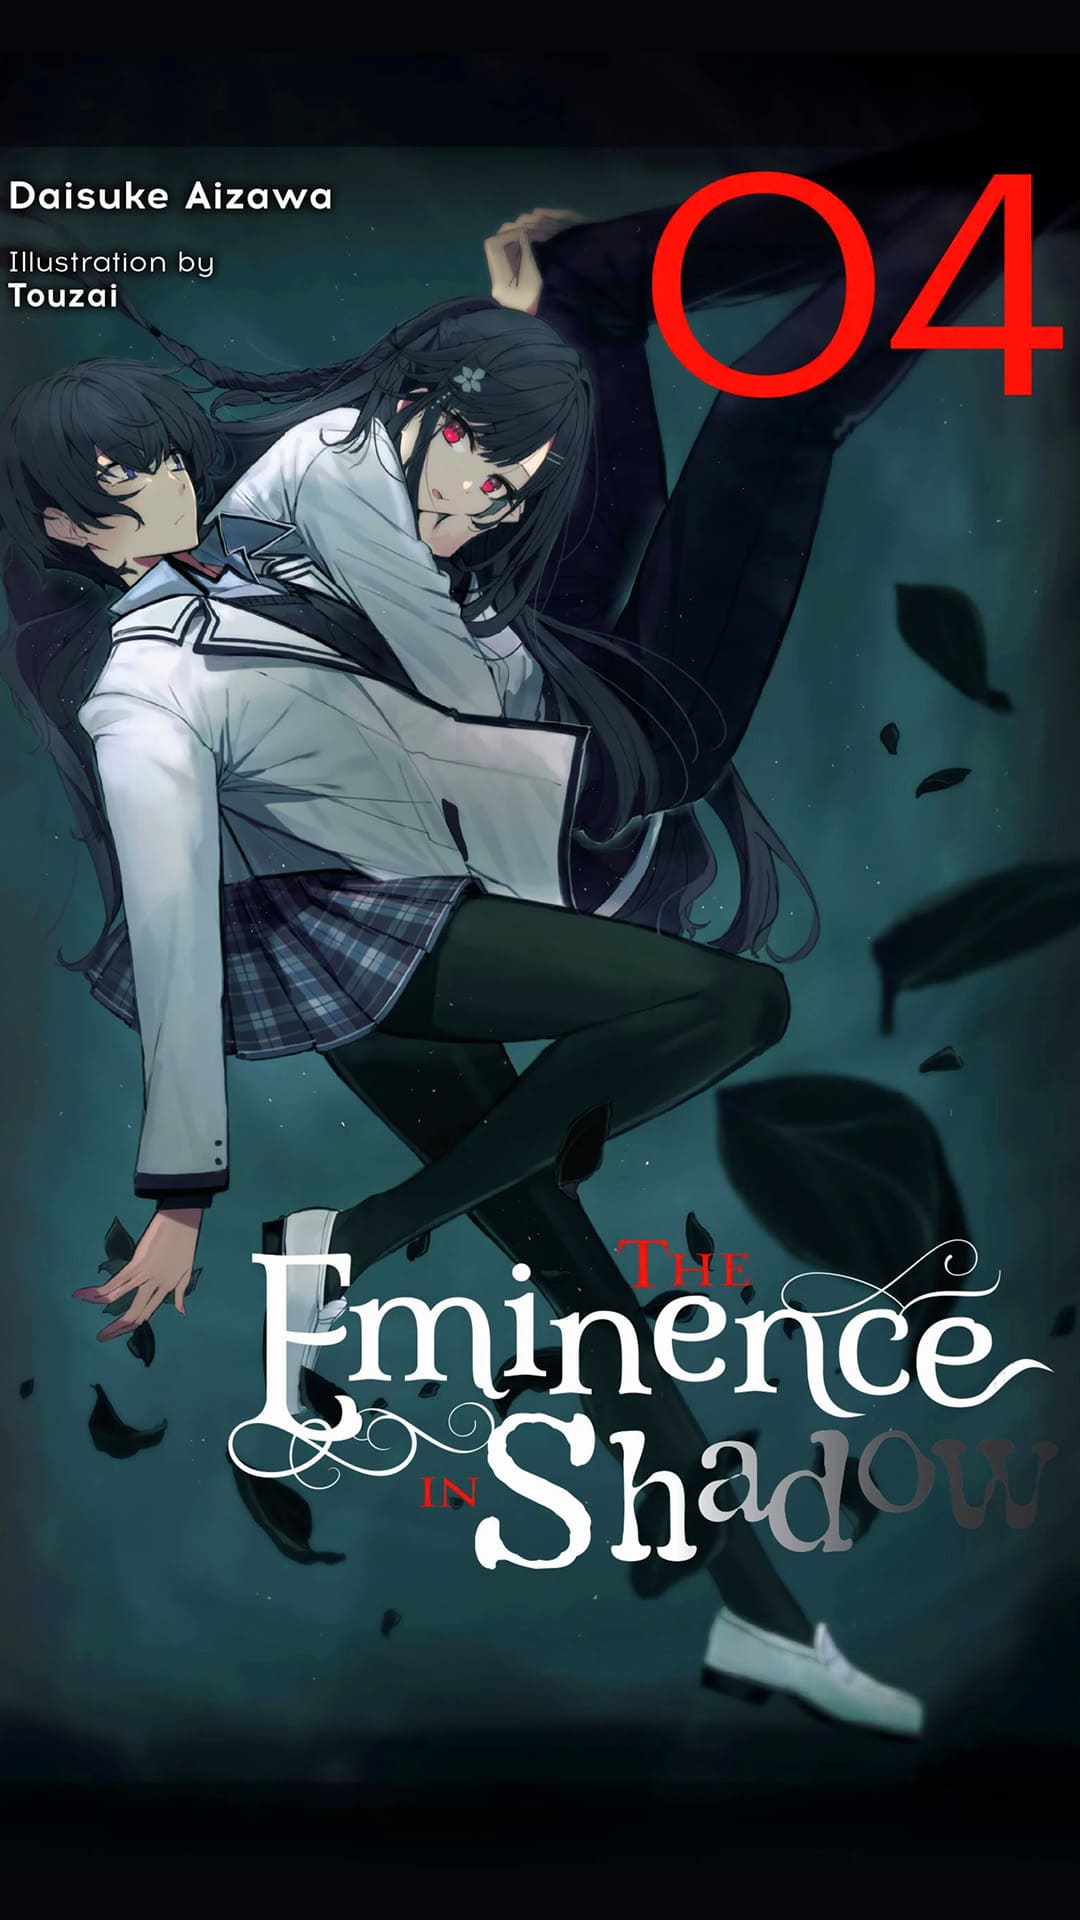 The Eminence in Shadow Vol1  Manga Review  NookGaming